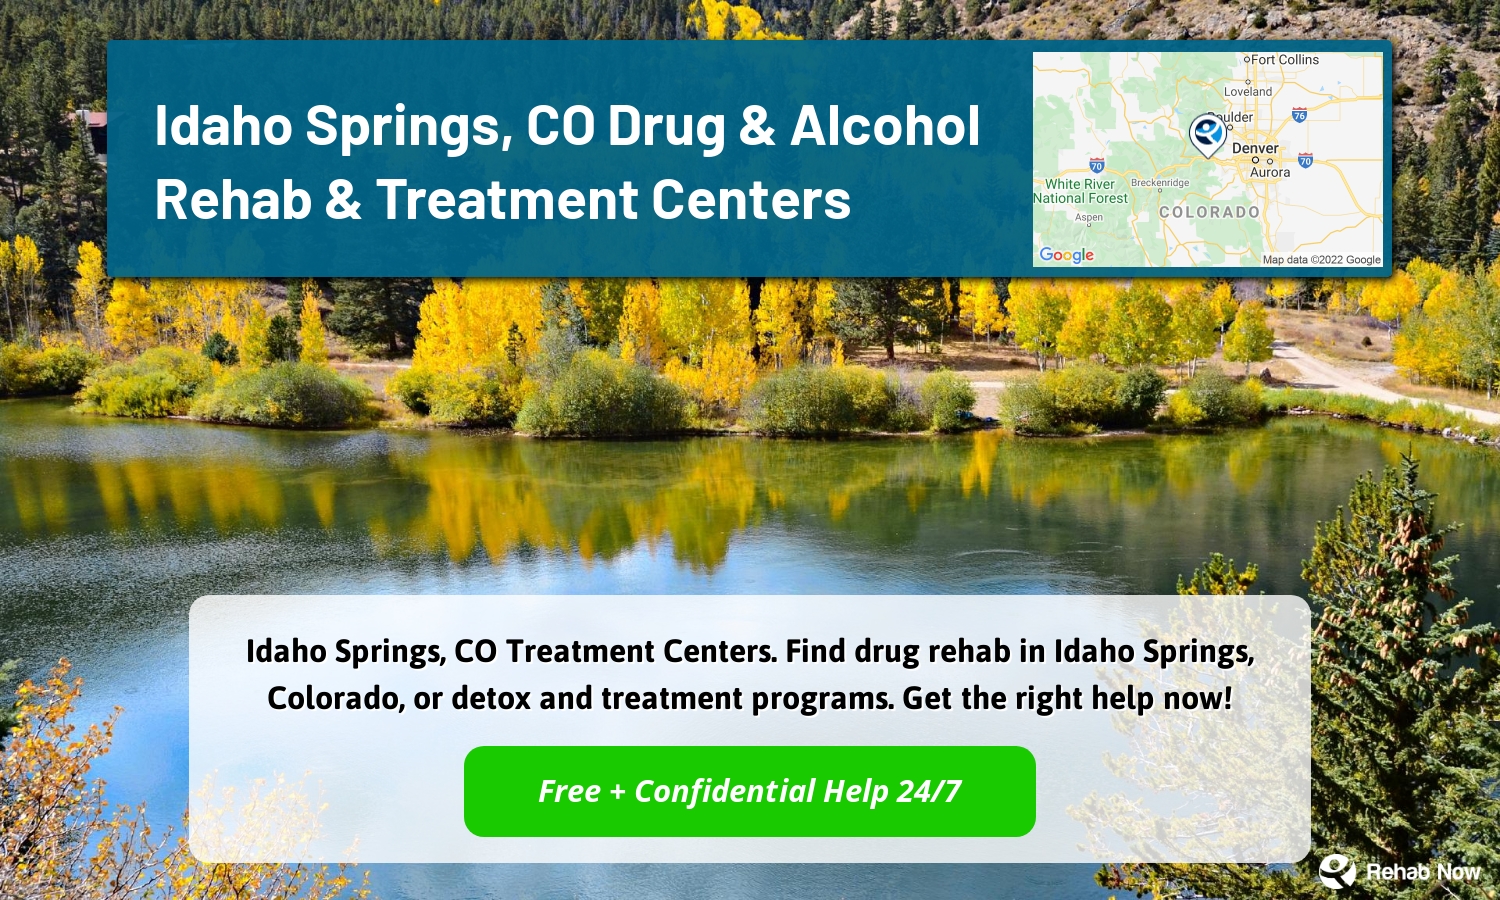 Idaho Springs, CO Treatment Centers. Find drug rehab in Idaho Springs, Colorado, or detox and treatment programs. Get the right help now!